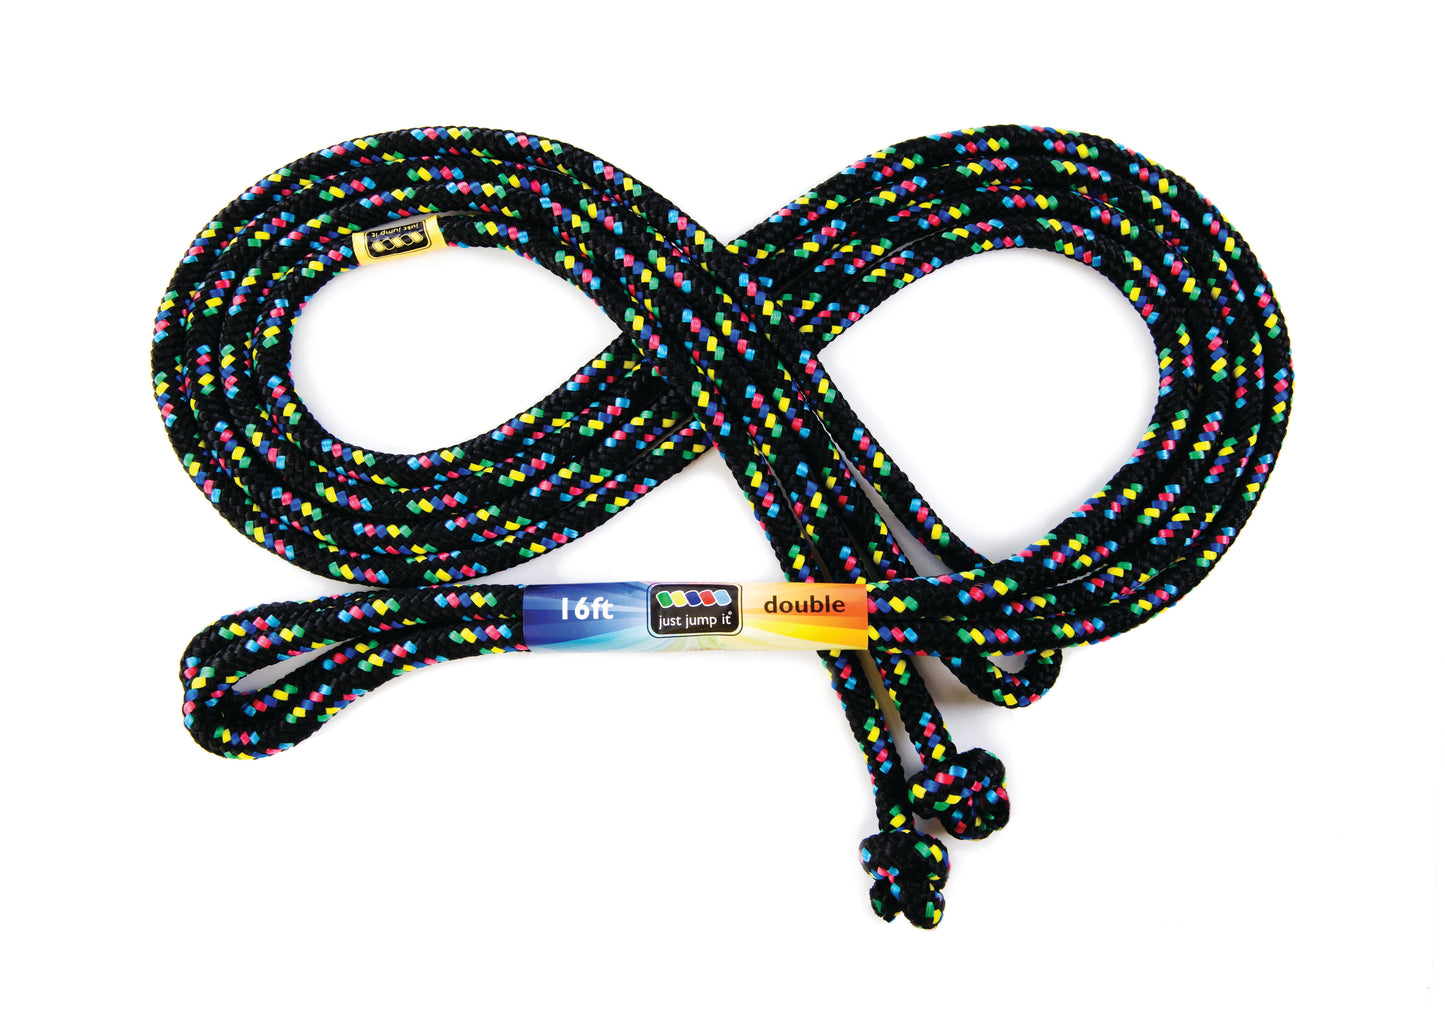 16' Double Dutch Jump Rope - Lots of Color Choices